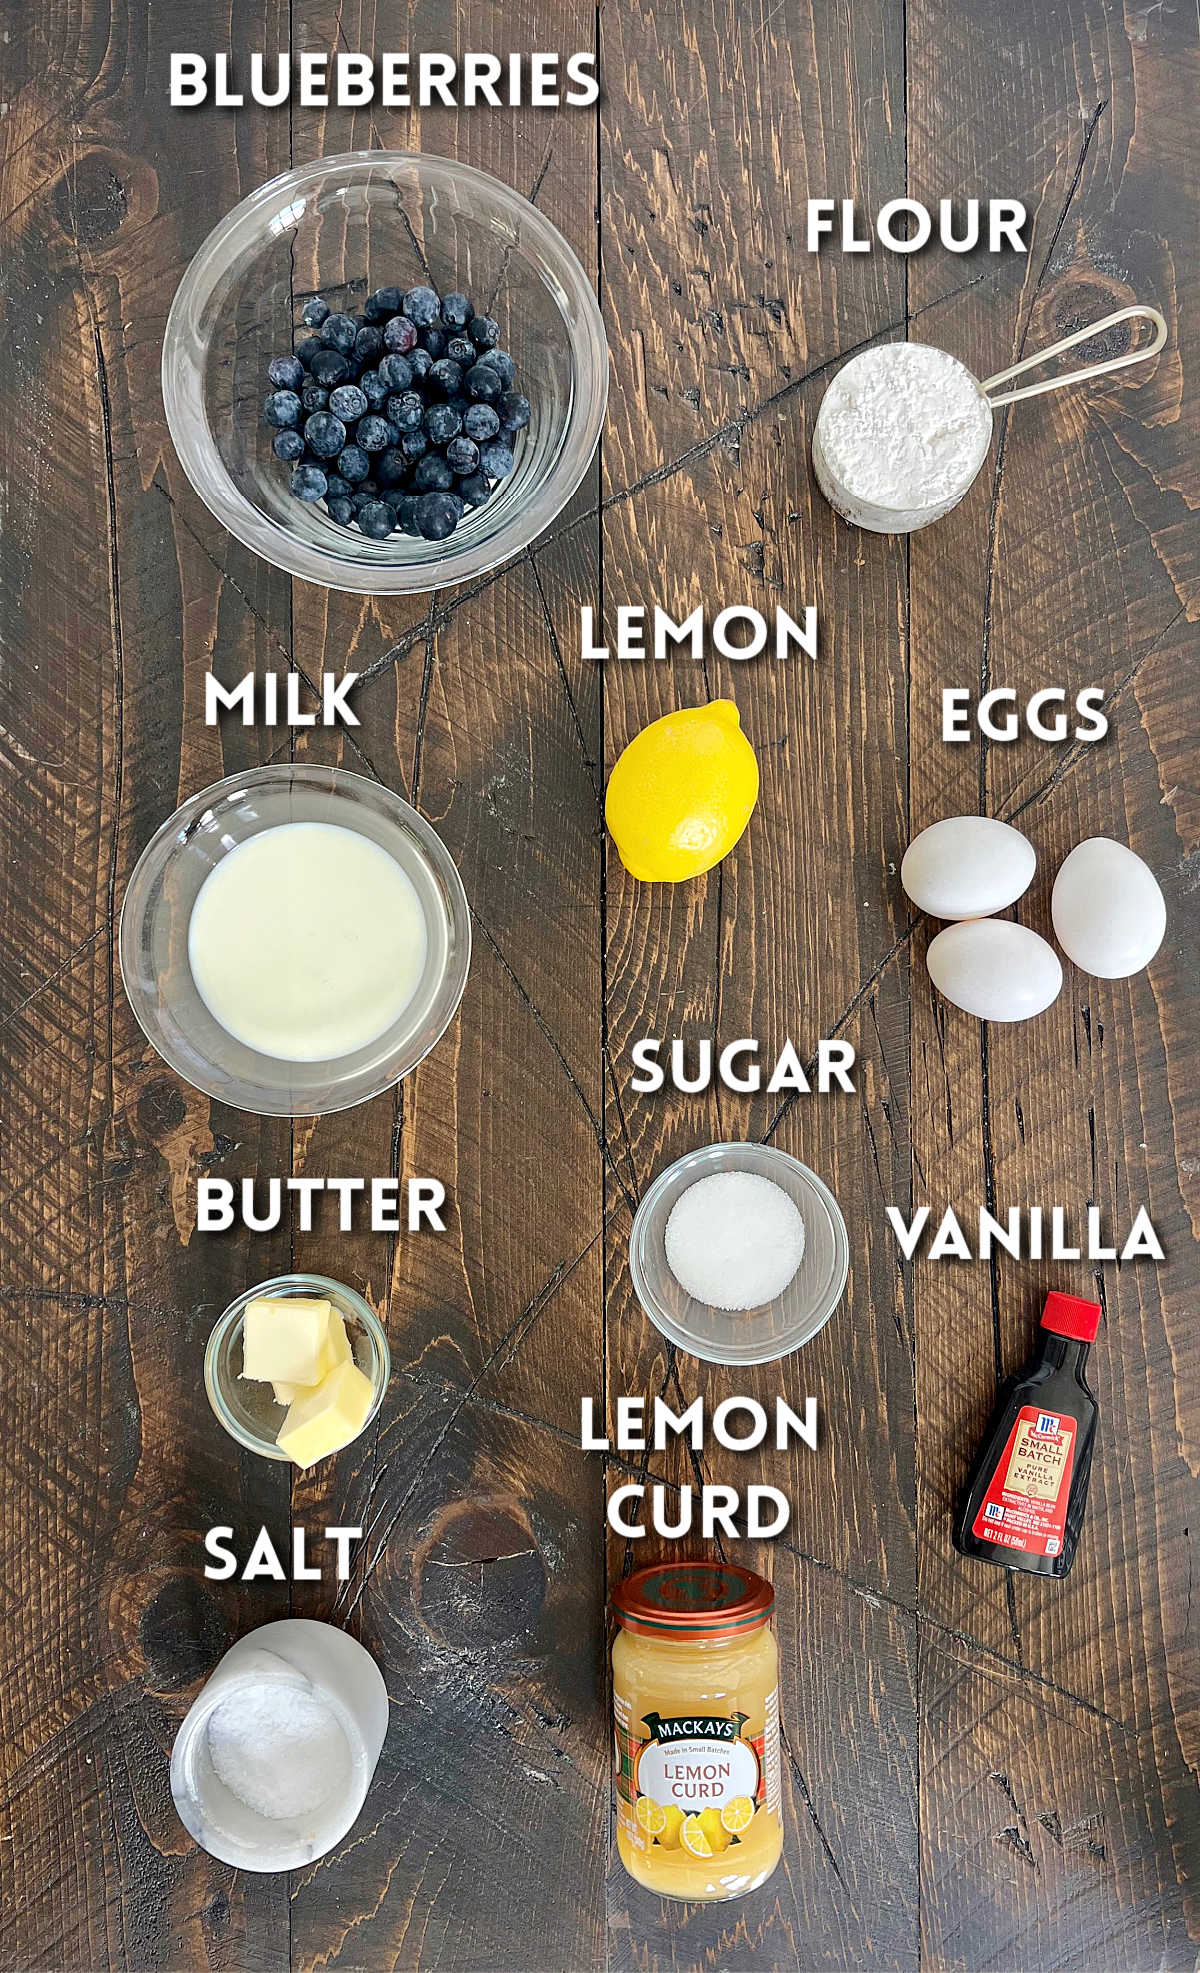 Ingredients for making a Blueberry Lemon Dutch Baby.